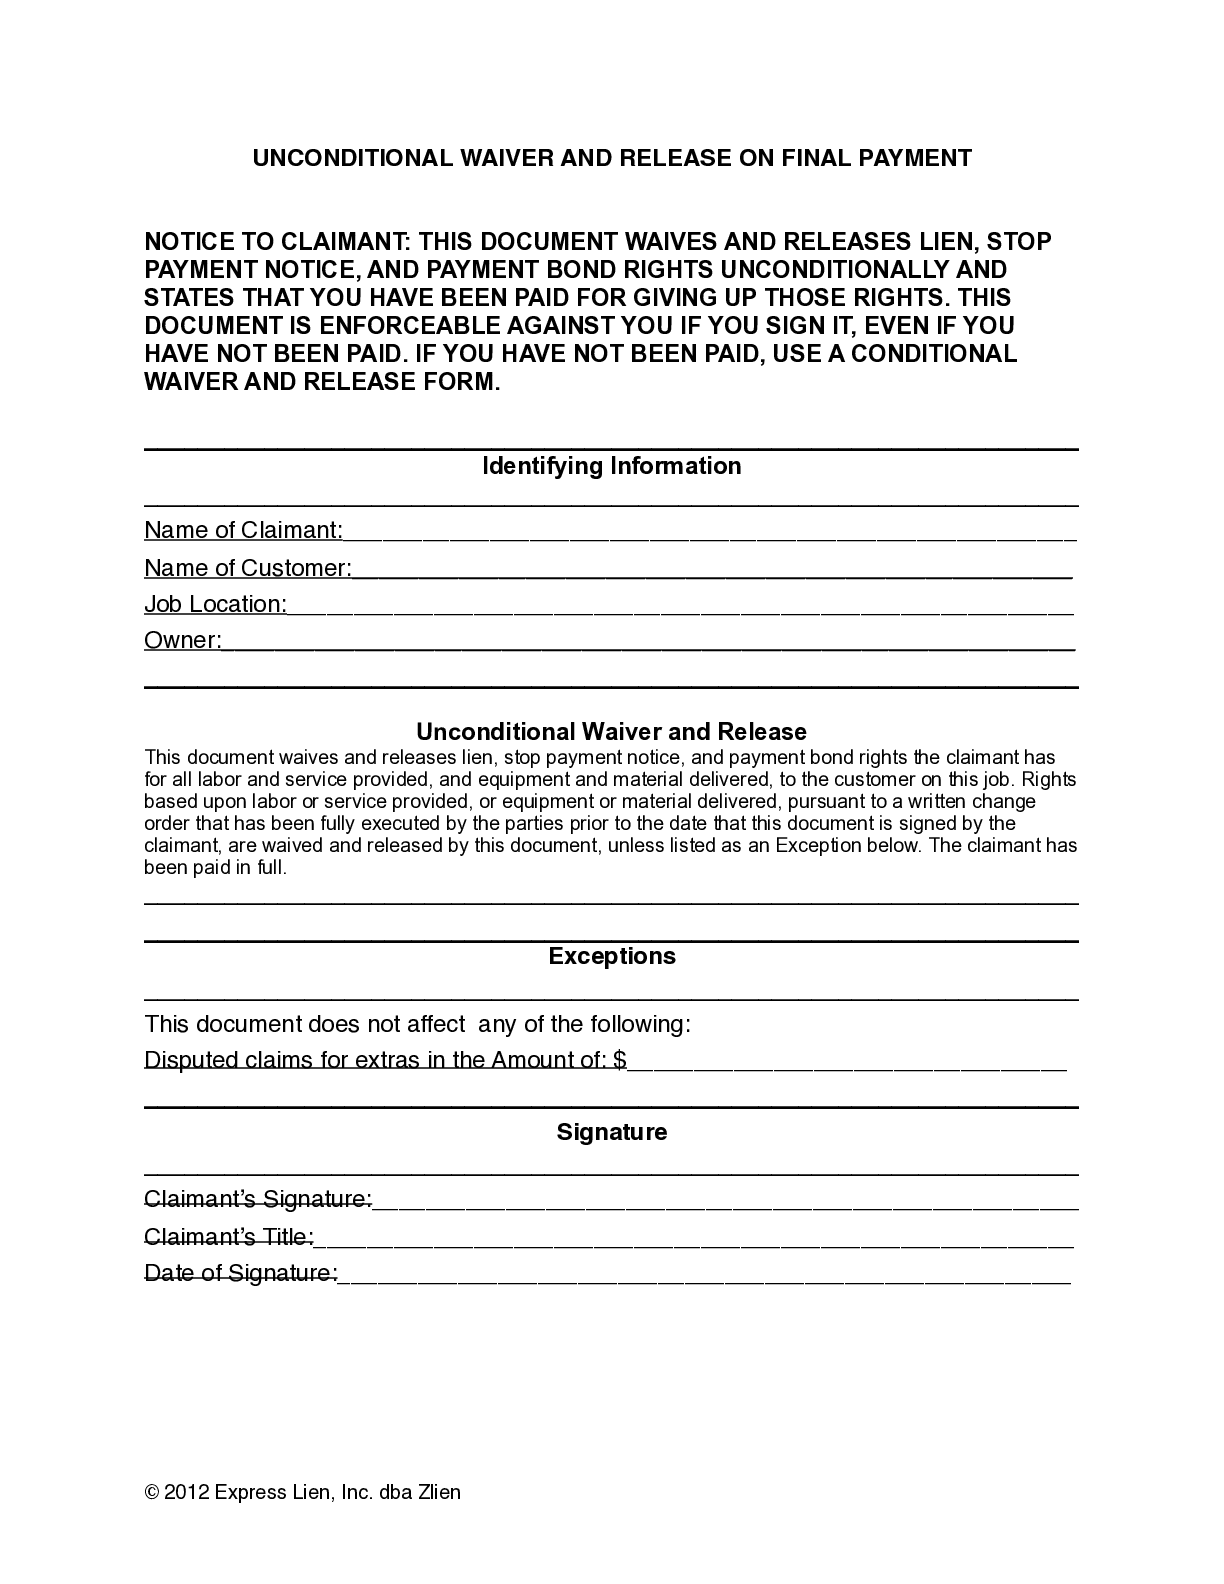 Oklahoma Final Unconditional Lien Waiver Form - free from